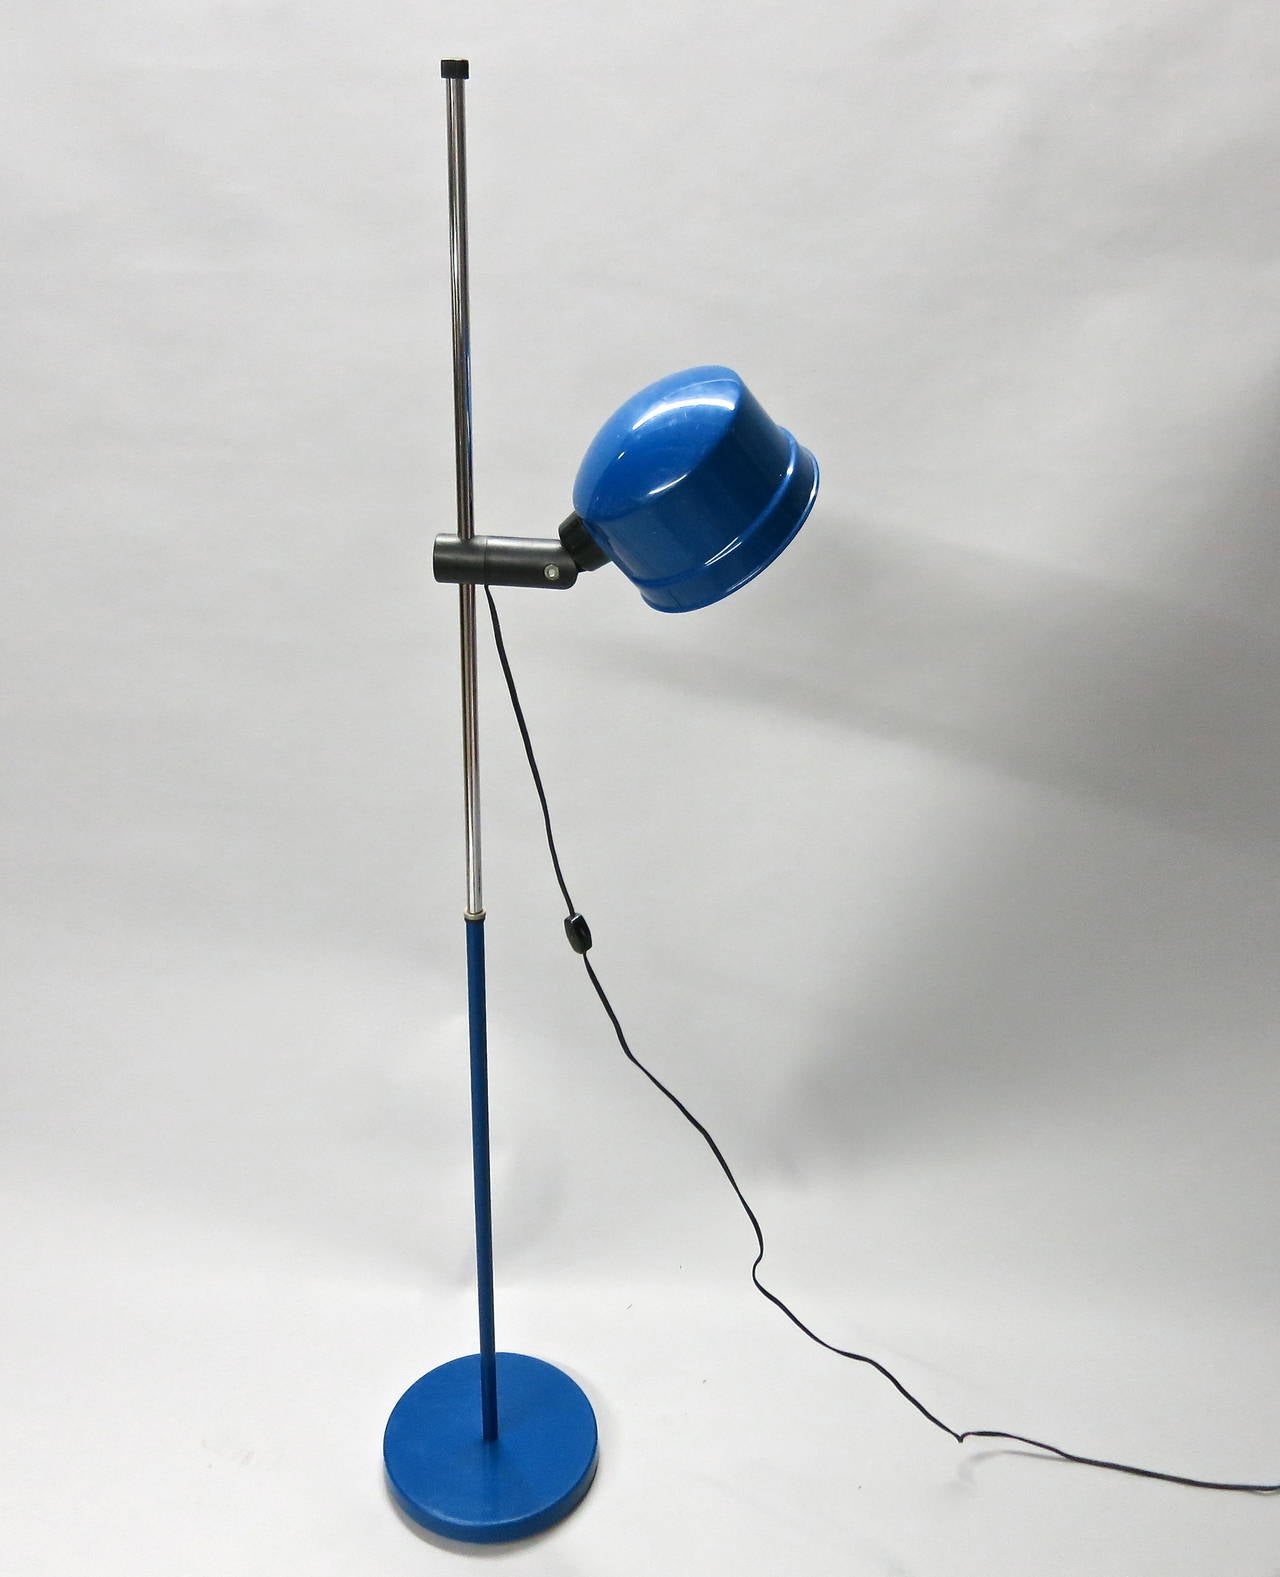 Standing Floor lamp in blue enameled metal with a removable molded plastic shade that can adjust up down and can spin.